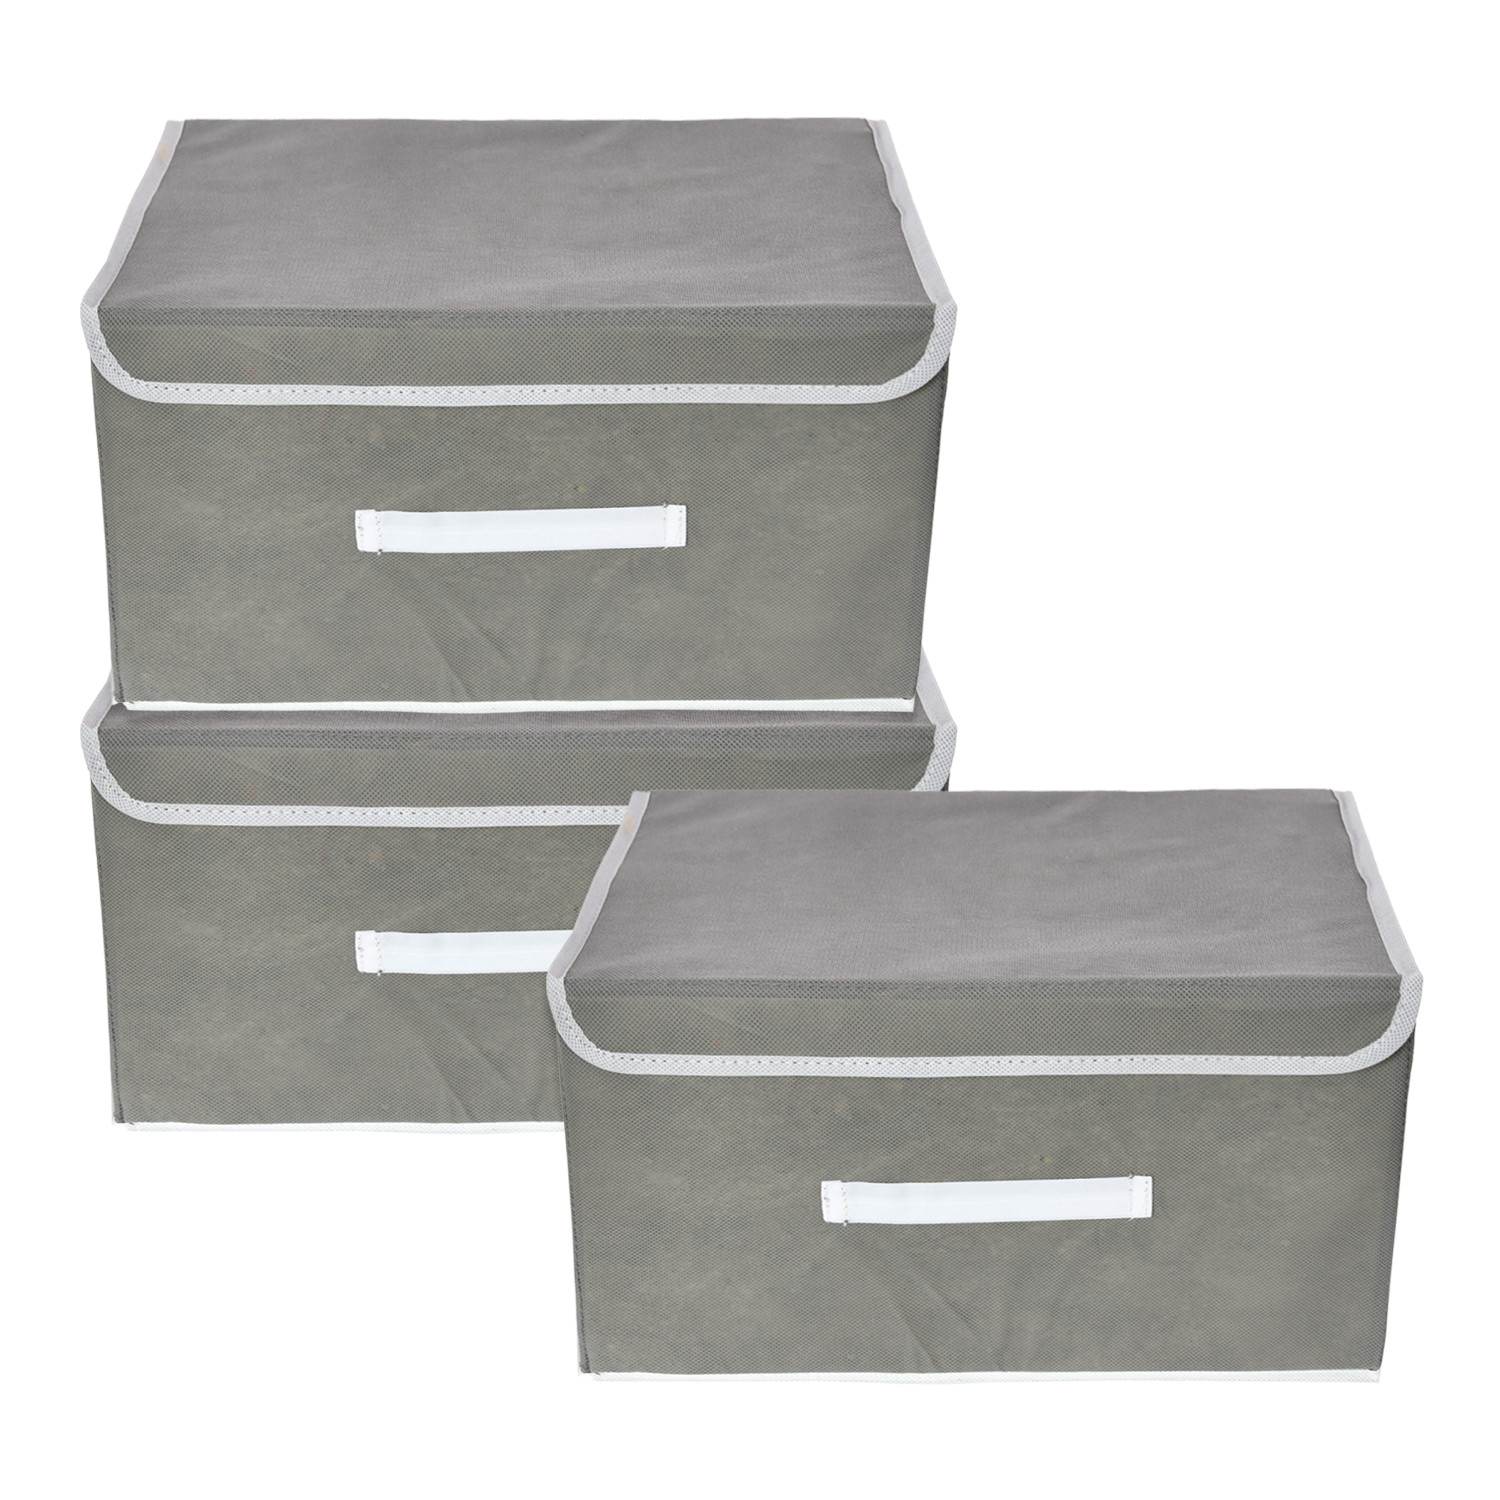 Kuber Industries Drawer Storage Box | Plain Dhakkan Storage Box | Non-Woven Clothes Organizer For Toys | Storage Box with Handle | Small | Gray